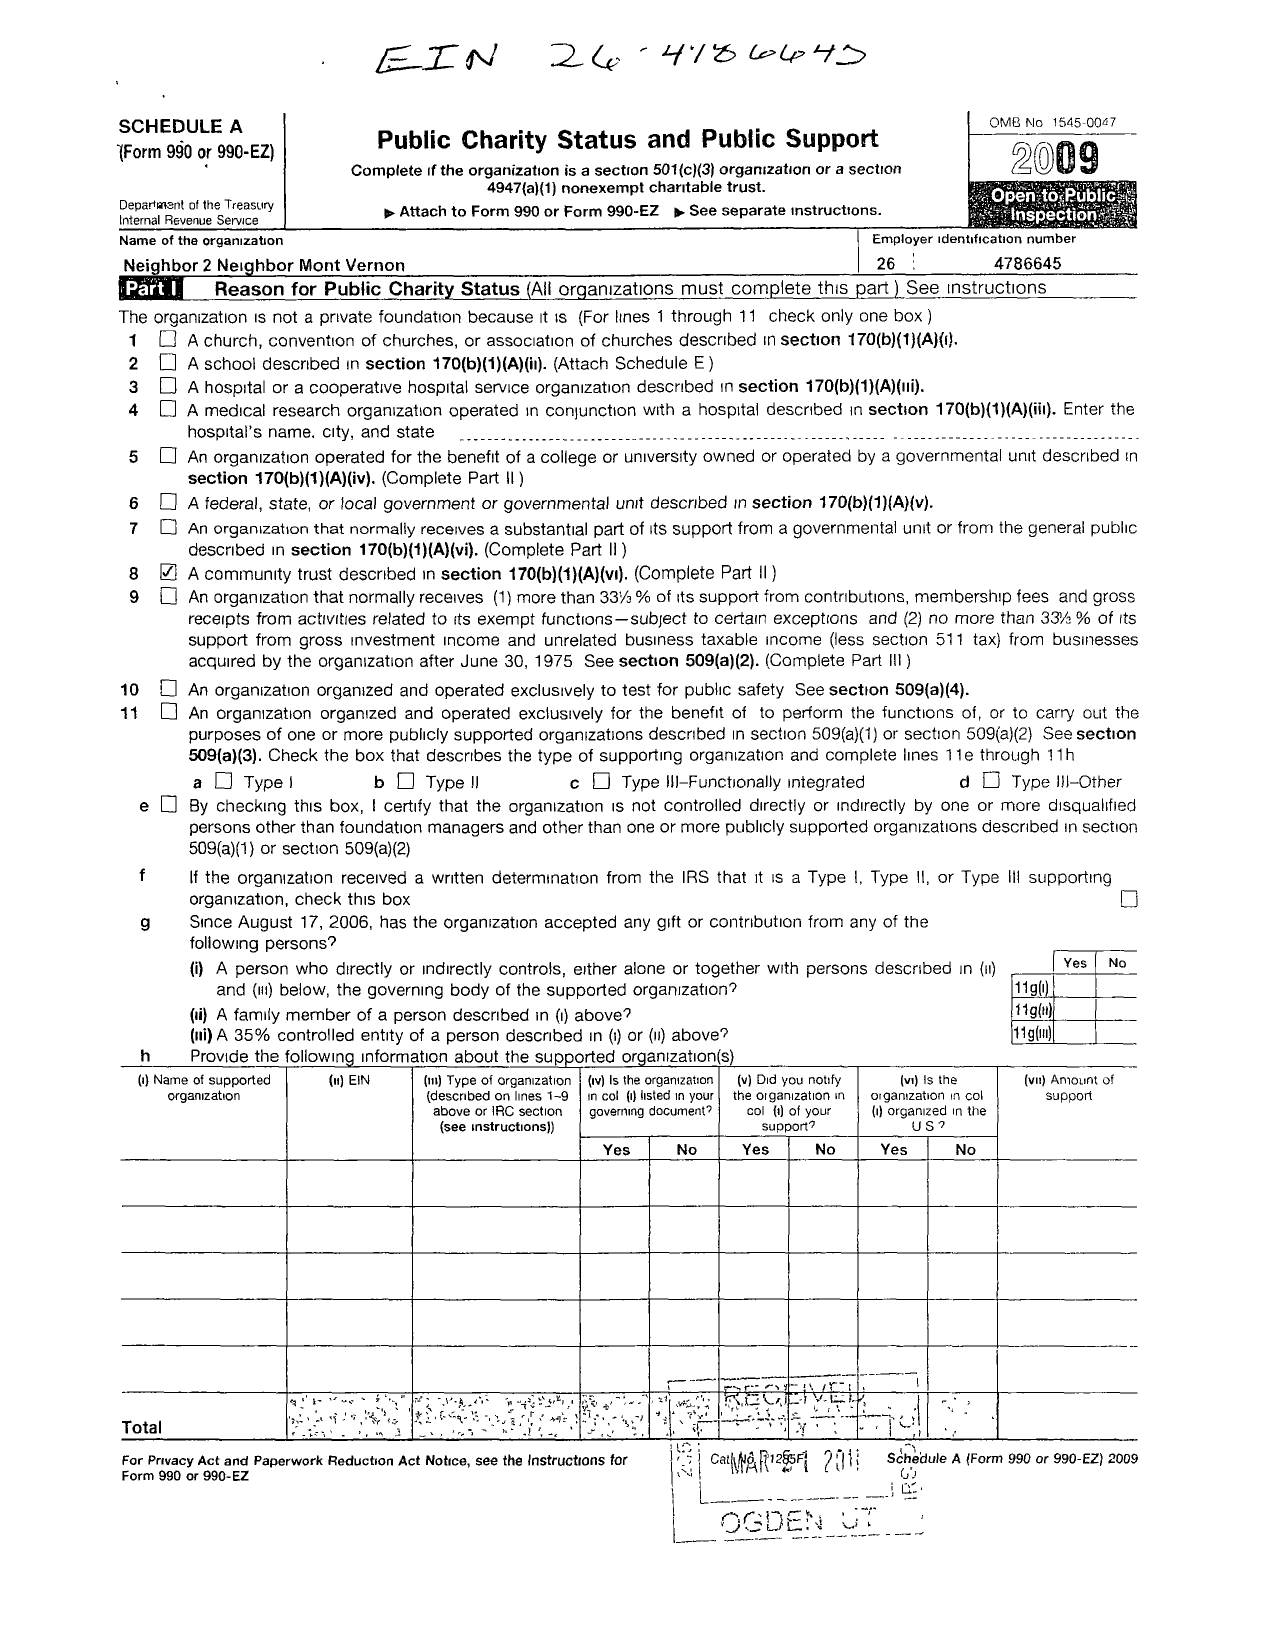 Image of first page of 2009 Form 990ER for Neighbor 2 Neighbor Mont Vernon